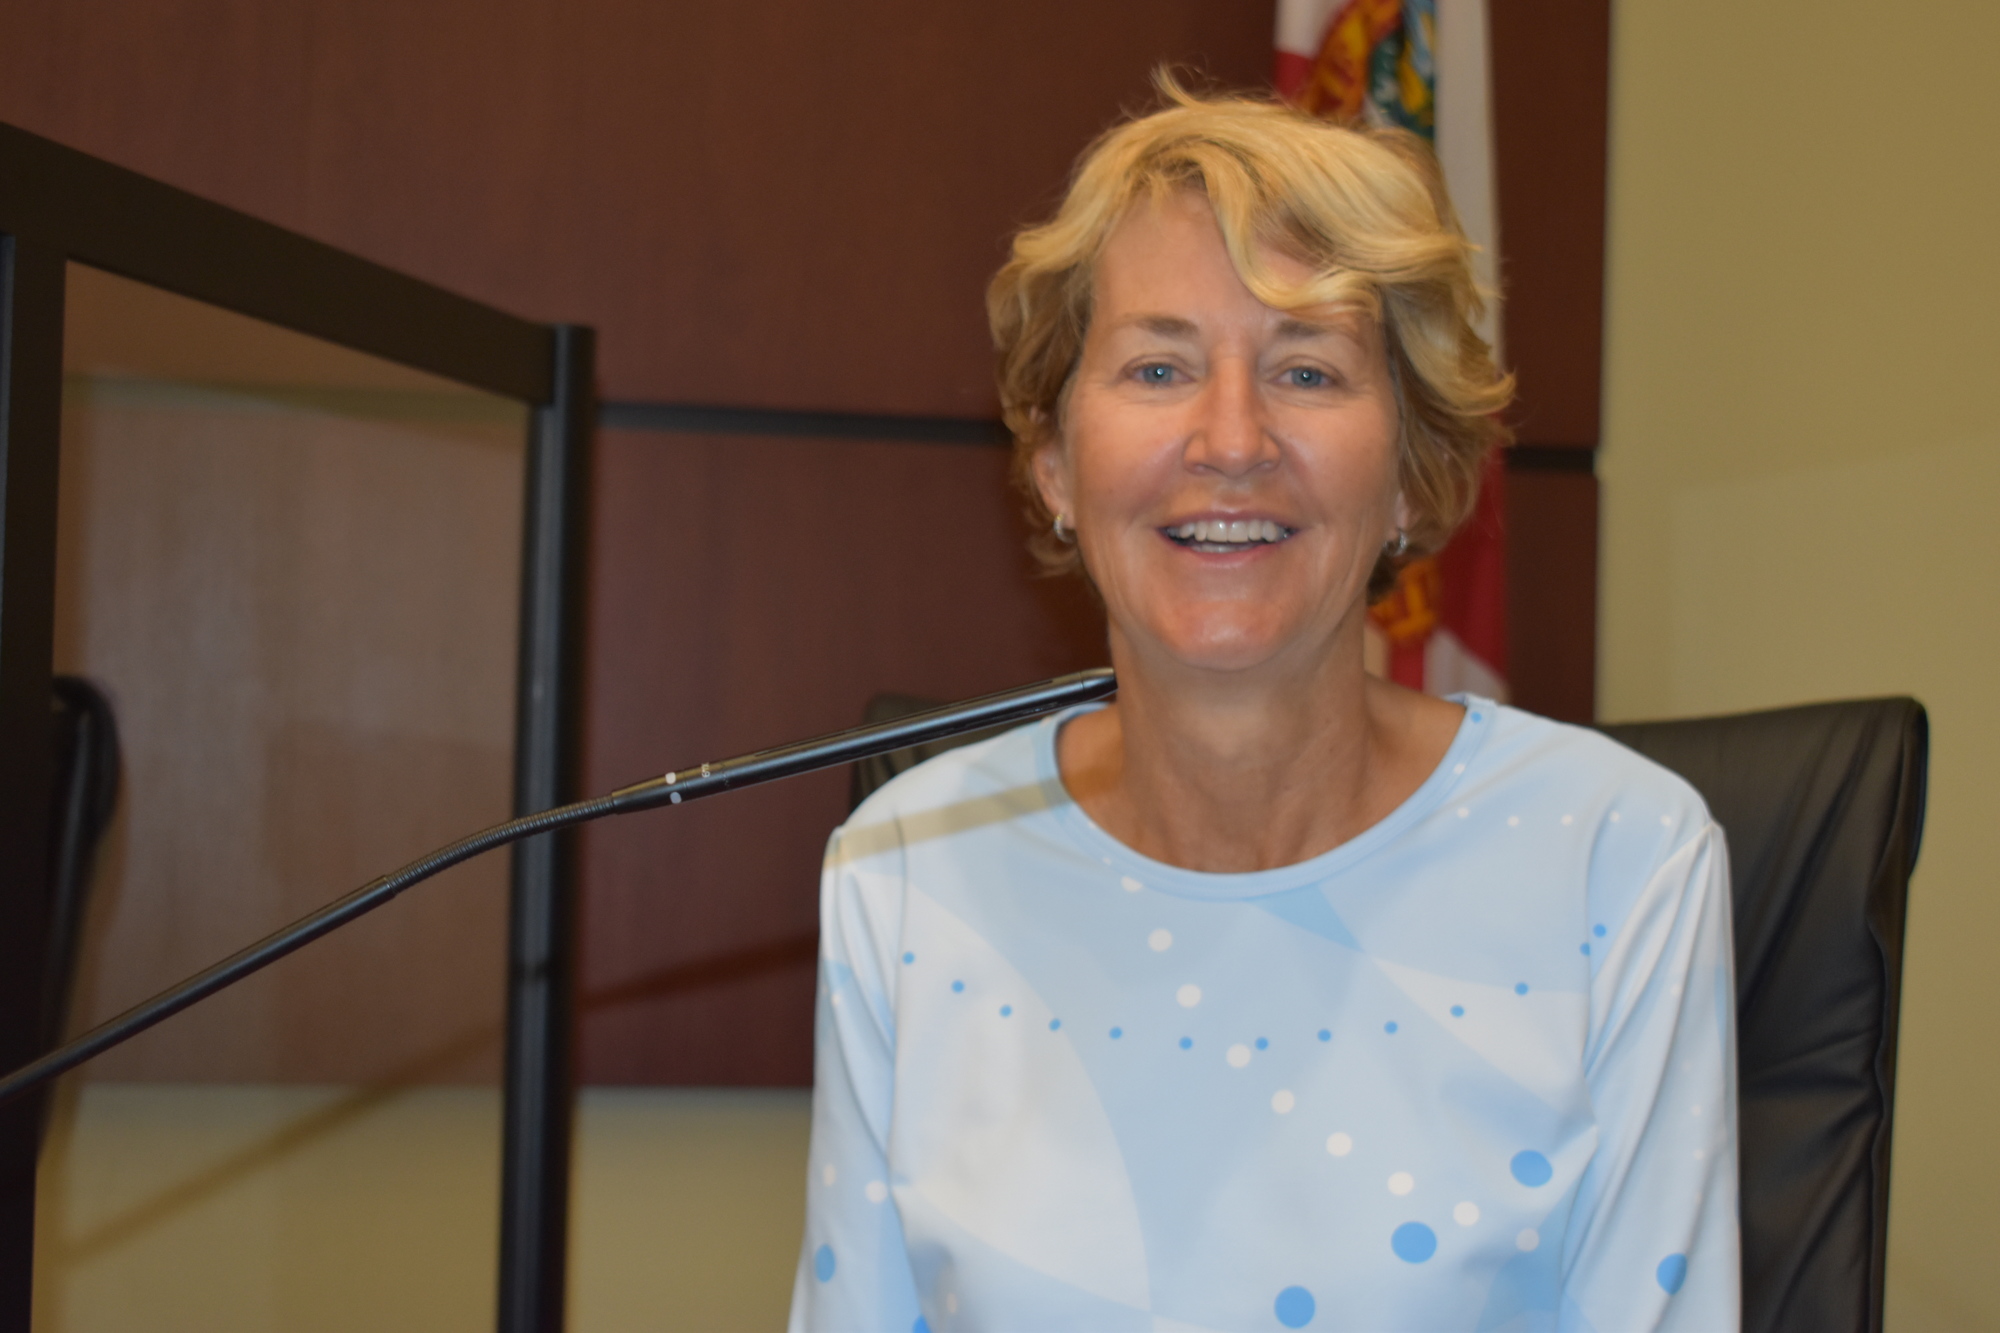 On Wednesday night, Commissioner Maureen Merrigan told the Longboat Key North community group she is frustrated about not being permitted to legally cross the Ohana property. File photo